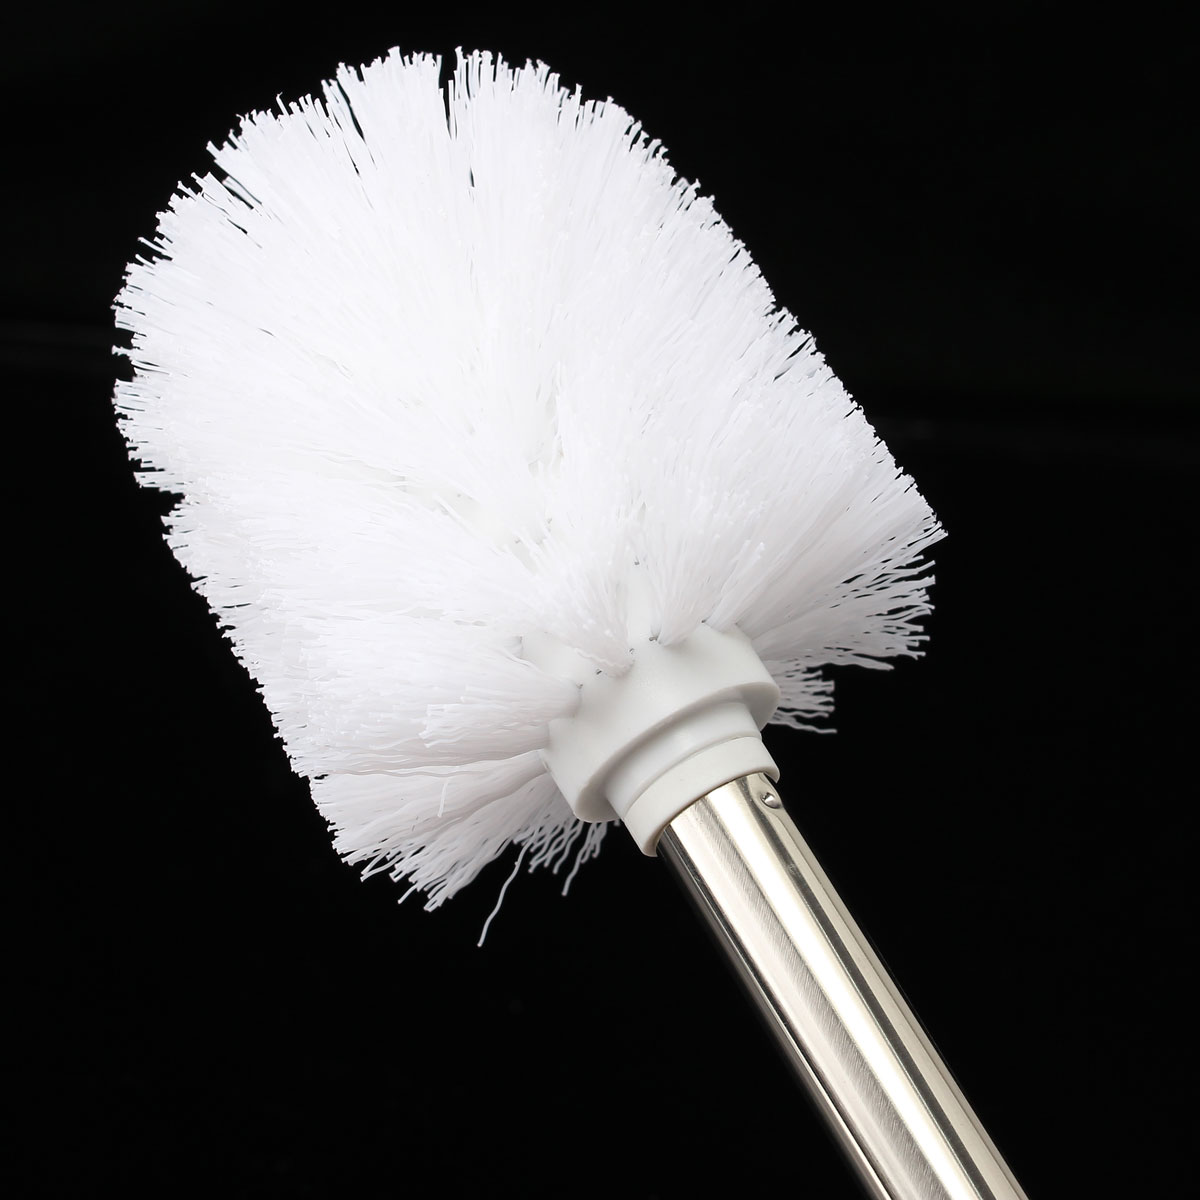 Stainless-Steel-WC-Bathroom-Cleaning-Toilet-Brush-White-Head-Holders-Cleaning-Brushes-1137680-8